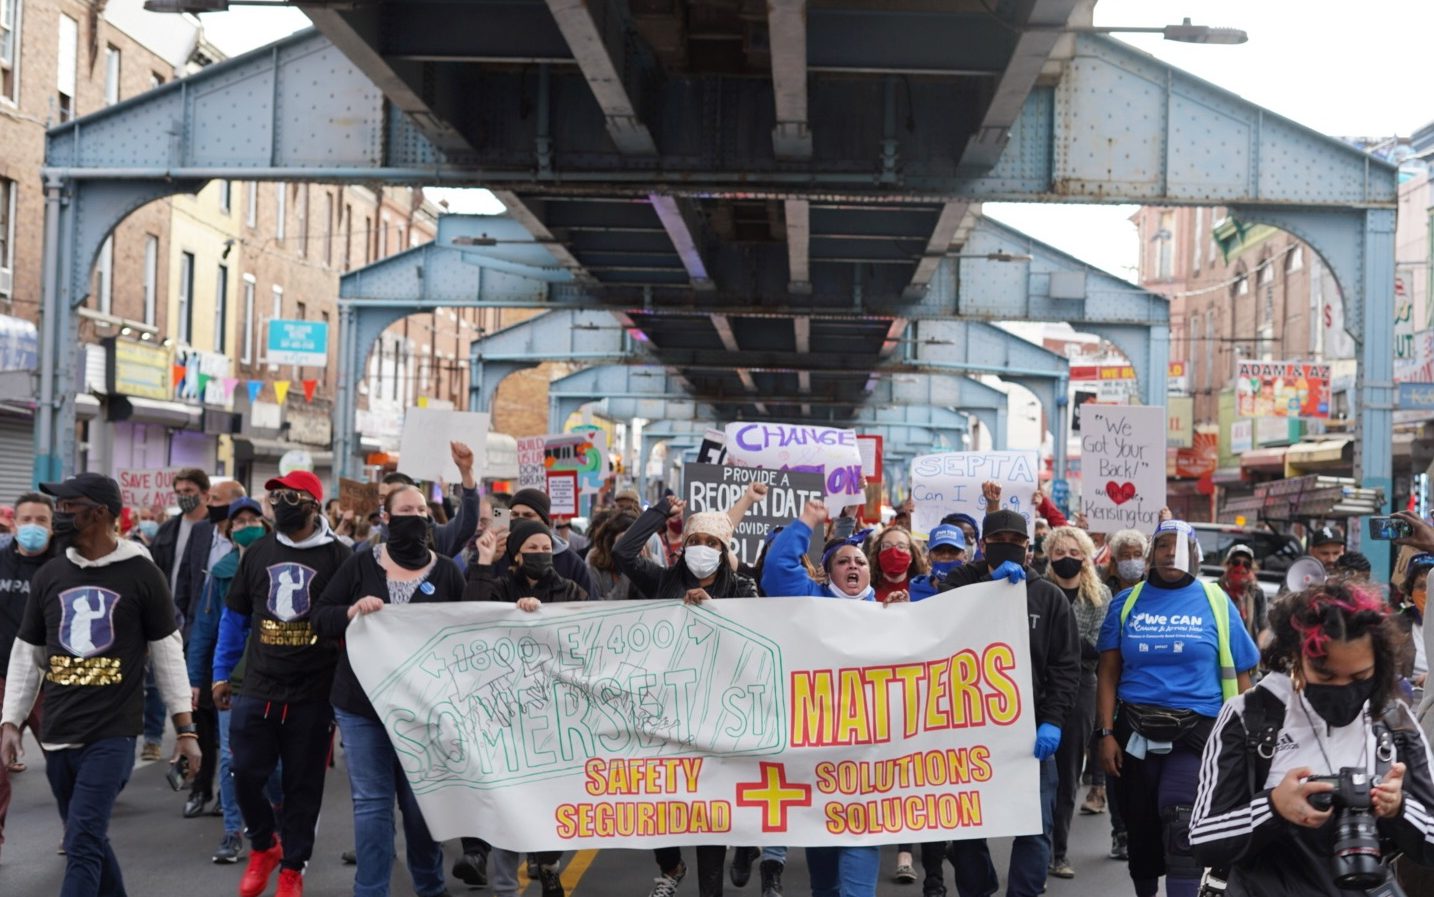 Kensington community organizers march for public safety solutions.